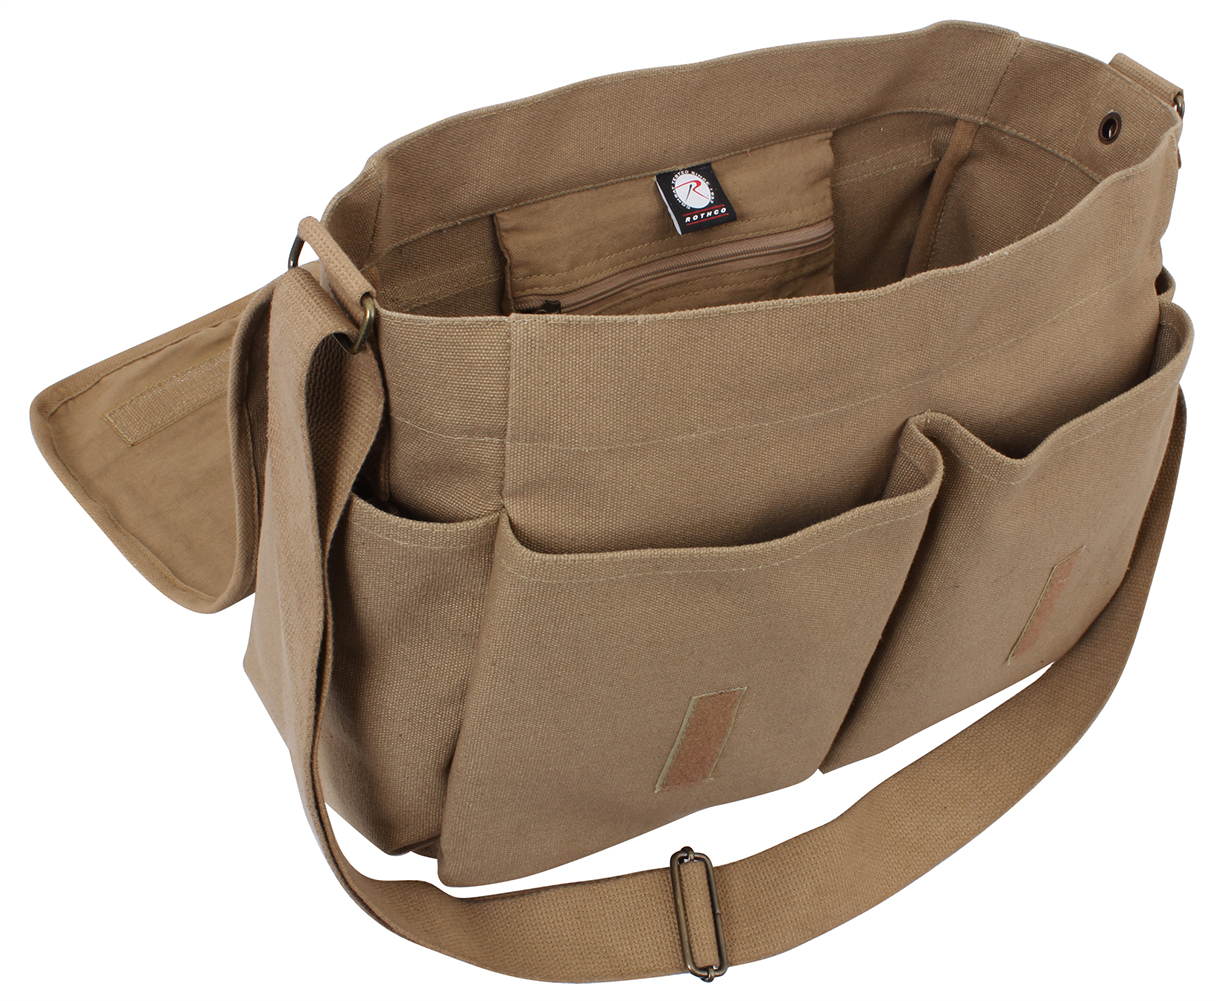 Rothco Classic Canvas Messenger Bag, Coyote Brown - image 1 of 3